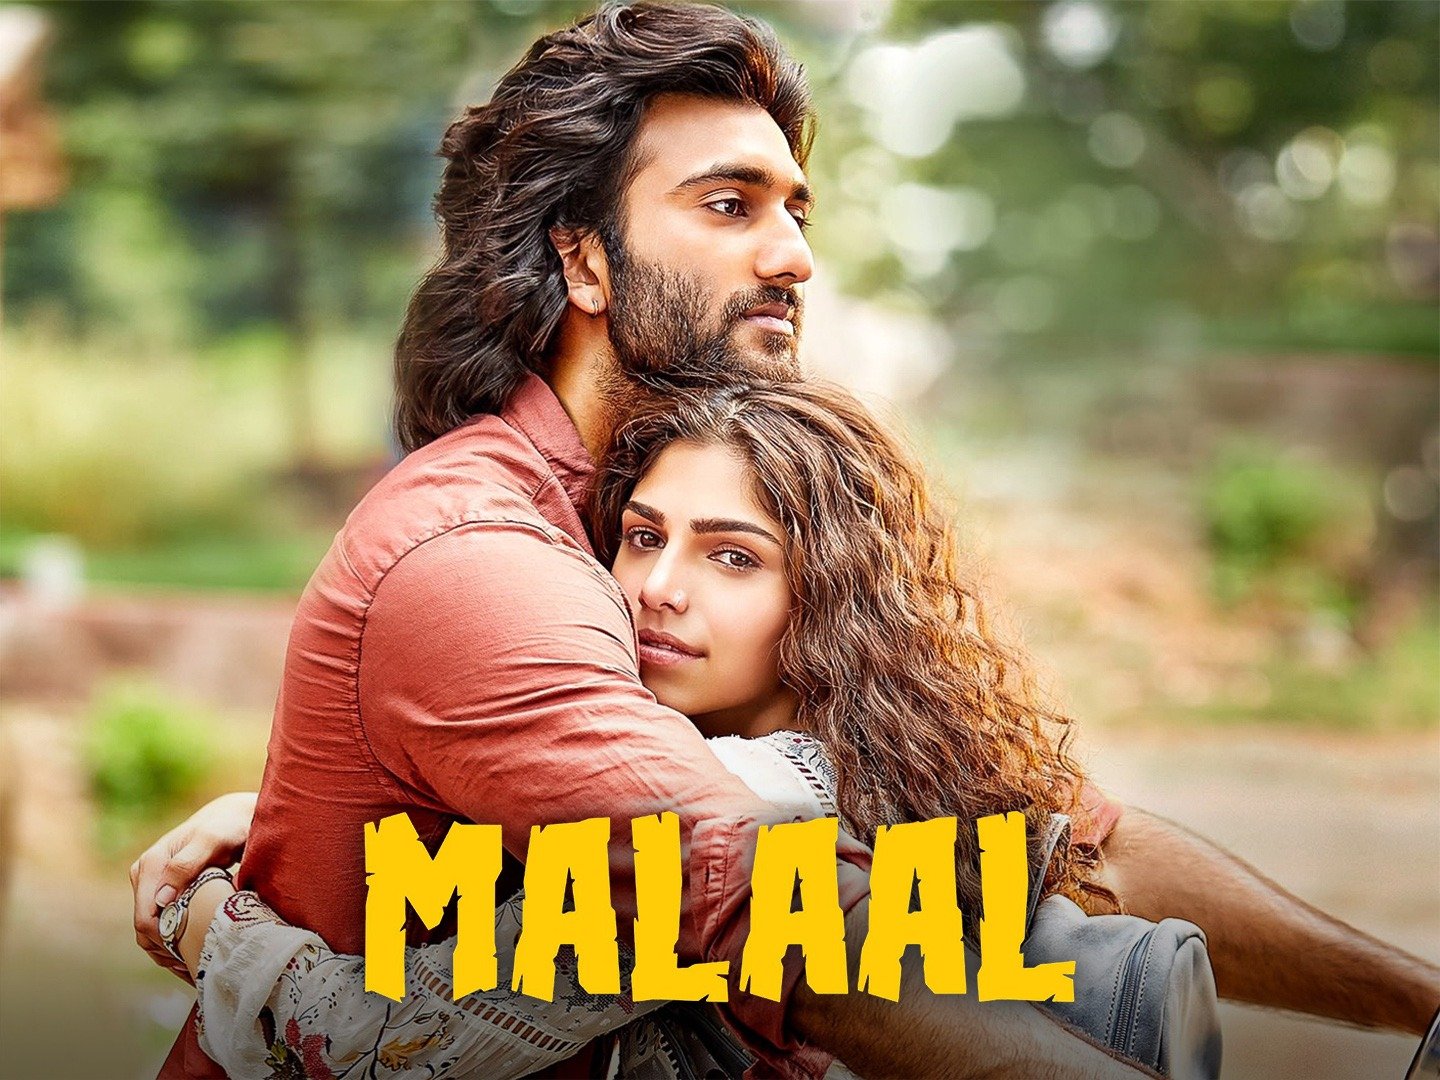 Malaal: Trailer 1 - Trailers & Videos - Rotten Tomatoes